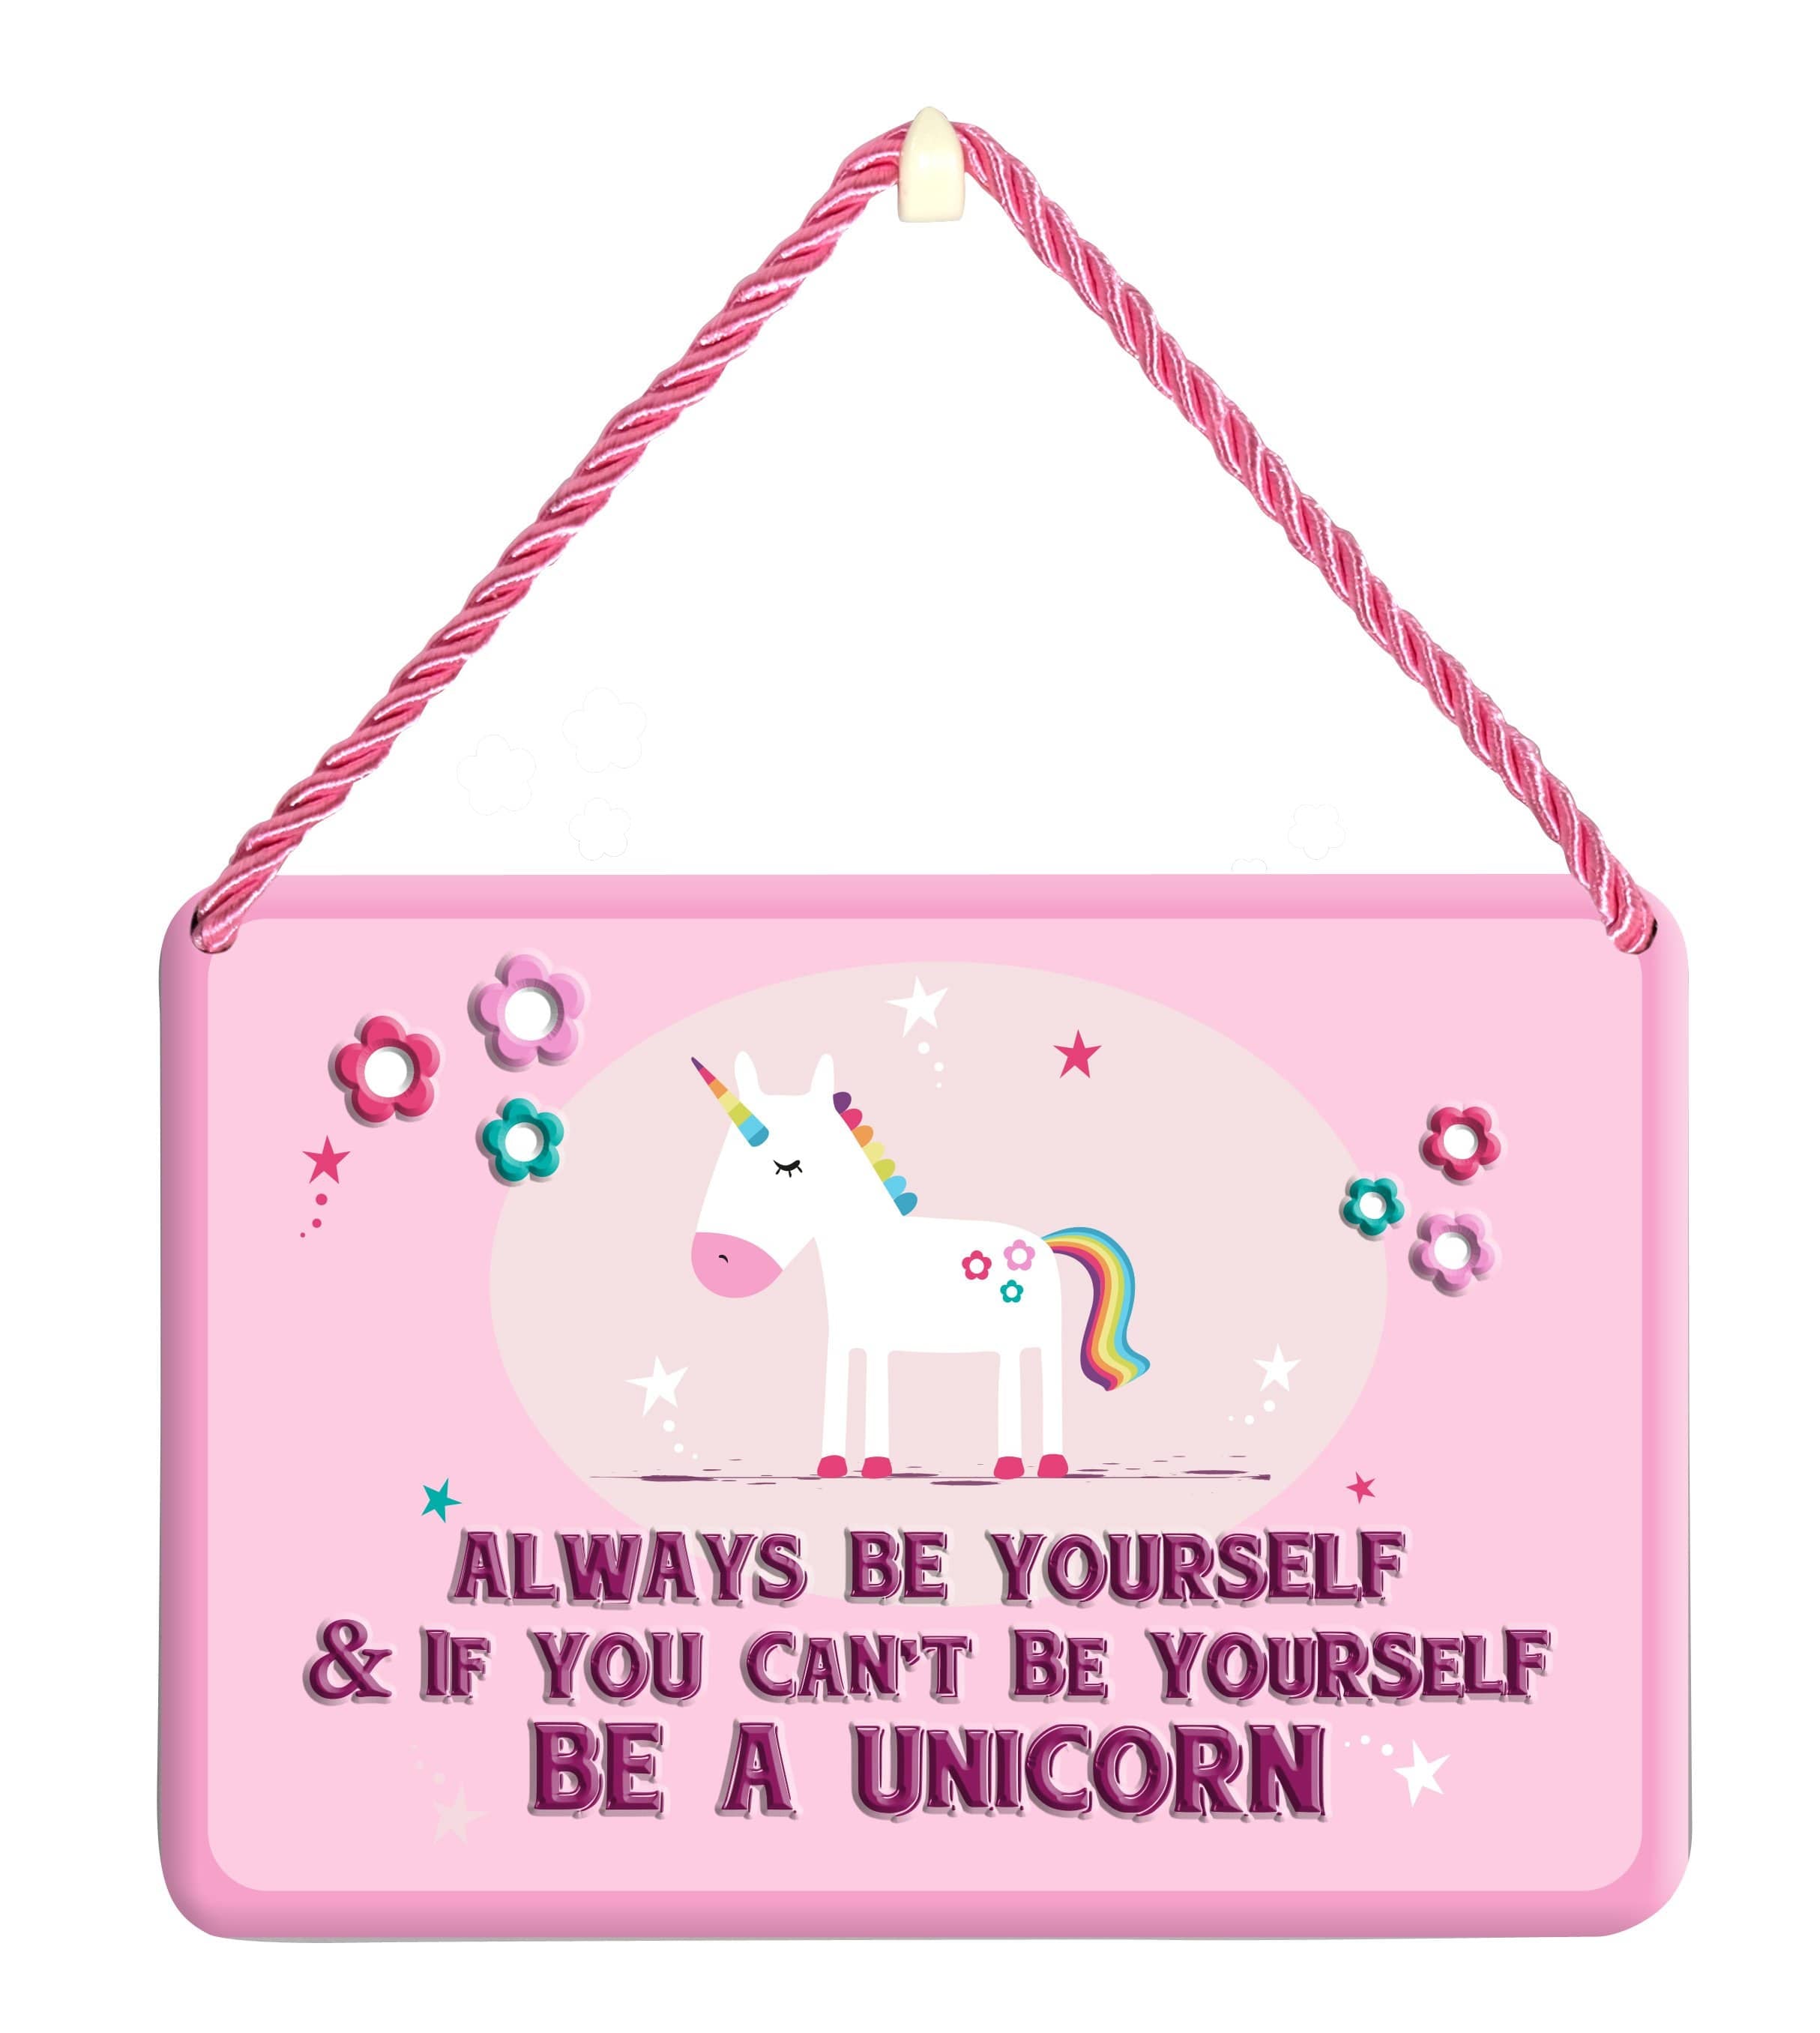 Curios Gifts Plaque Heartwarmers Hang-Ups Plaque - Always Be Yourself & If You Can't Be Yourself Be A Unicorn